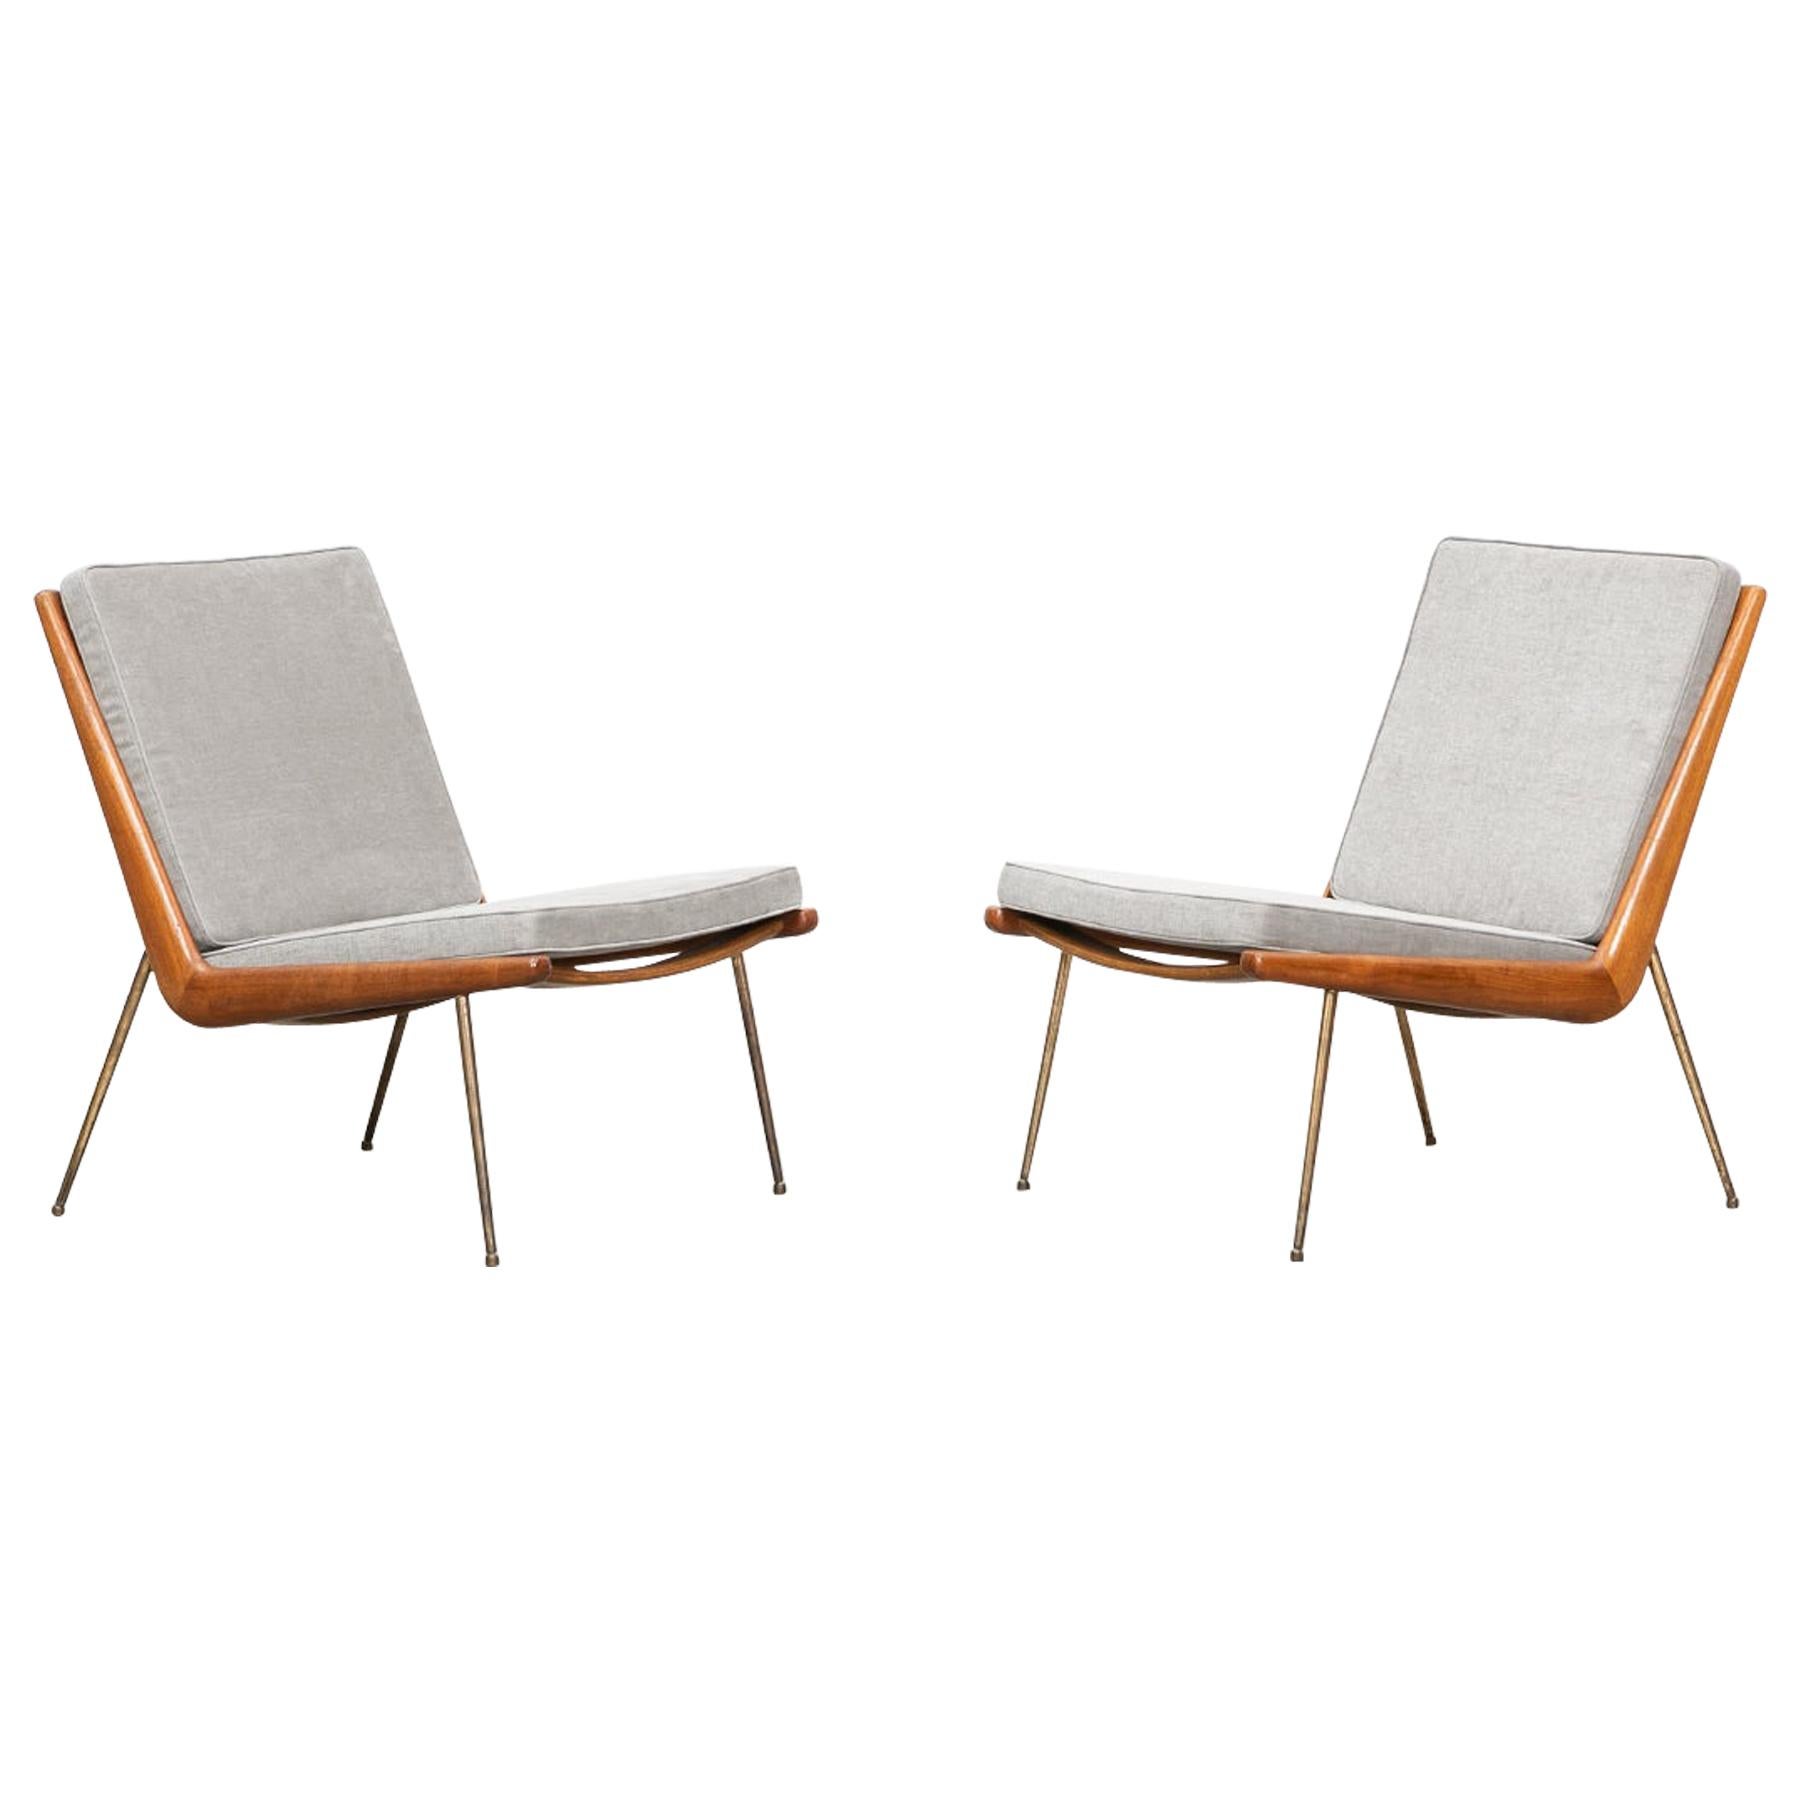 1950s Teak and Brass Lounge Chairs by Peter Hvidt 'd'